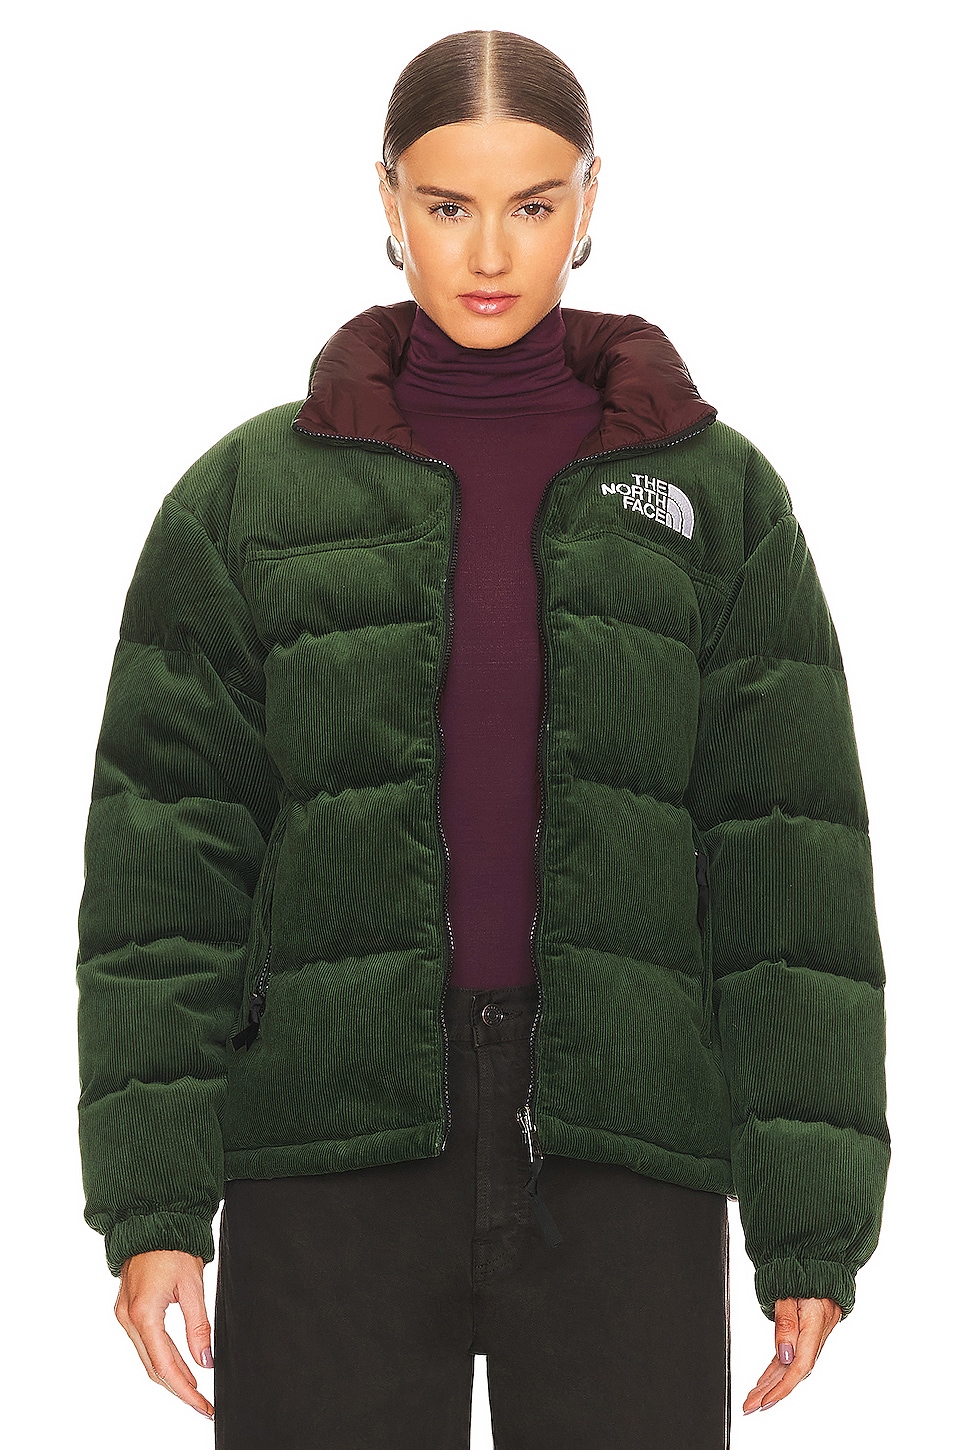 The North Face 92 Reversible Nuptse Jacket in Pine Needle & Coal Brown ...